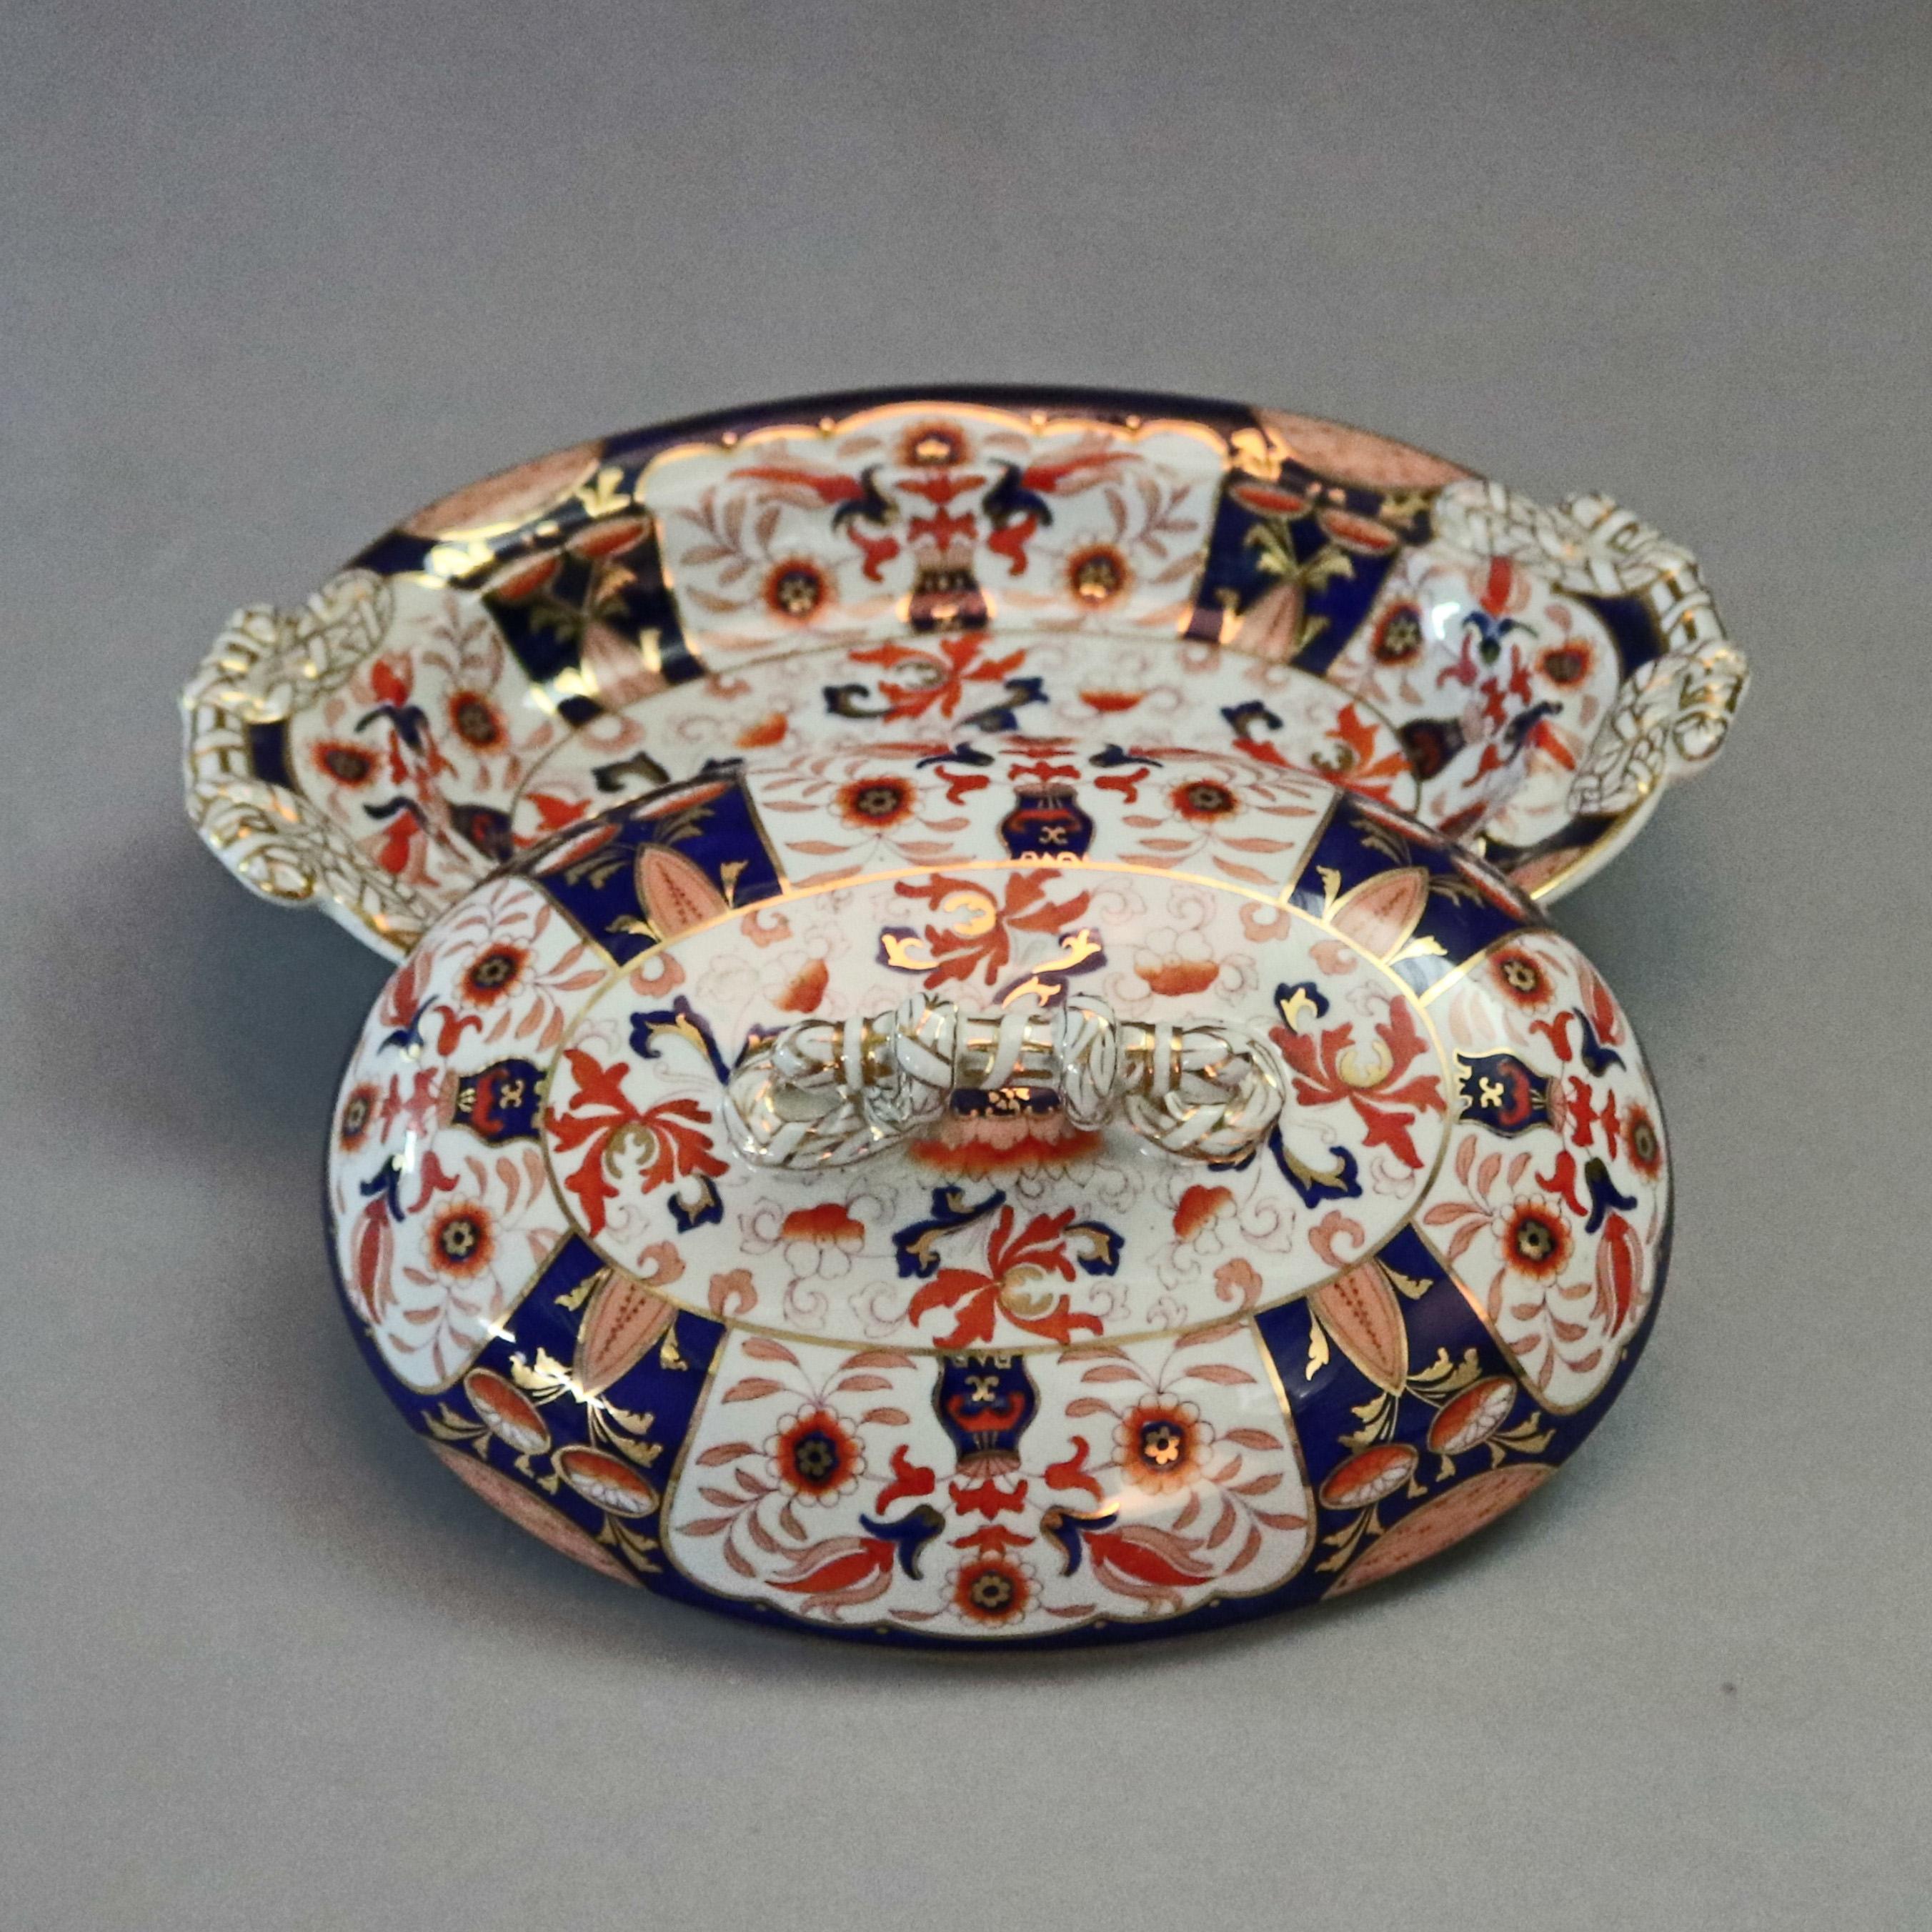 An antique Imari style chinoiserie Ashworth Ironstone lidded tureen offers all-over hand painted floral and foliate paneled decoration with gilt highlights, lid with gilt decorated stick form handle, maker's crown stamp on base as photographed,